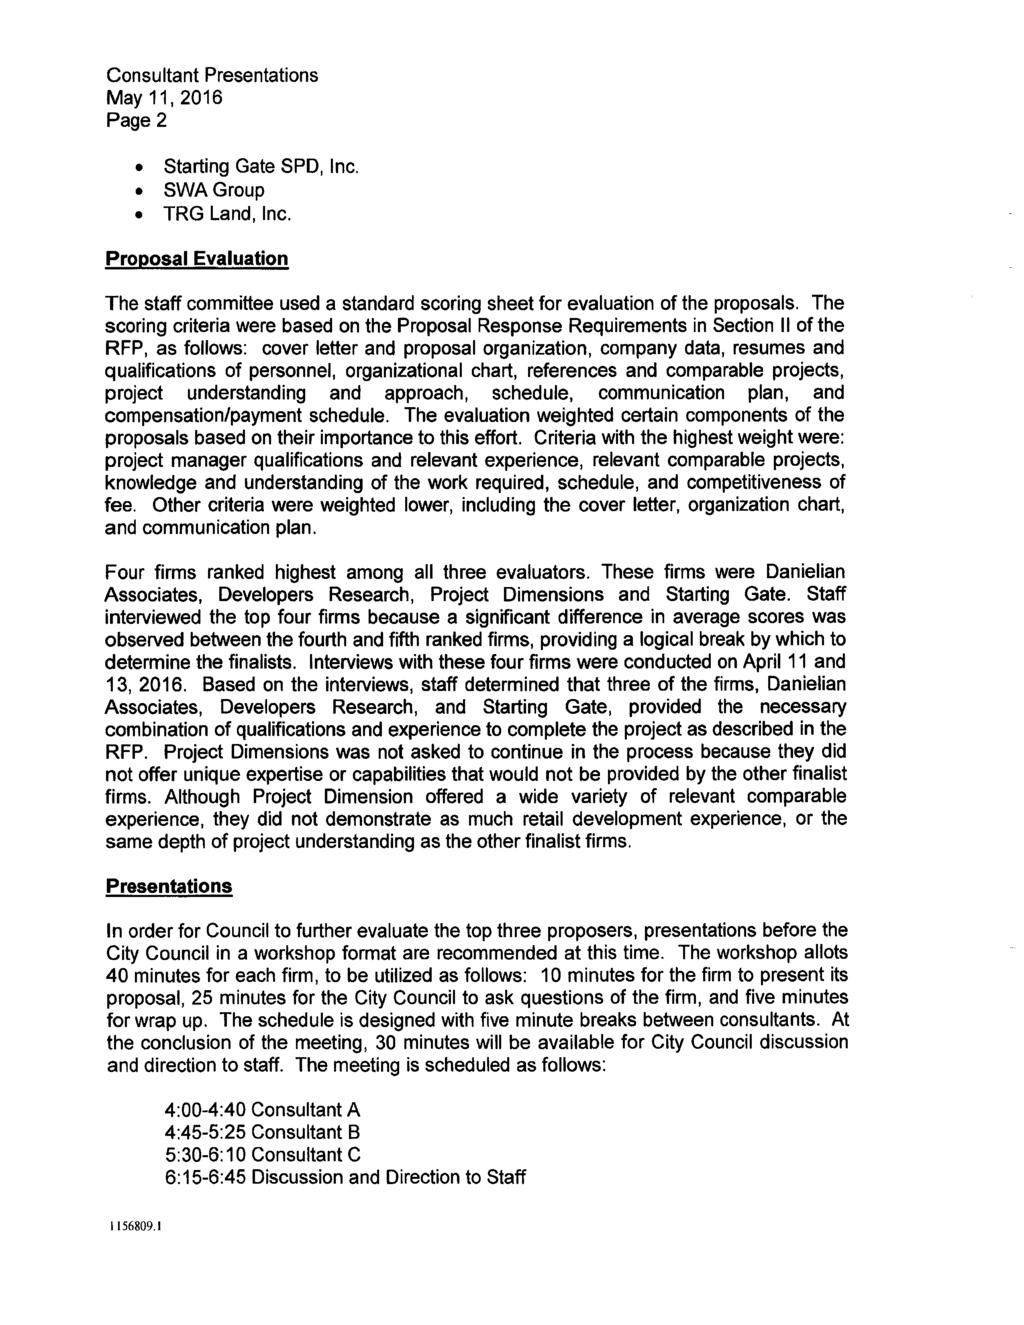 Consultant Presentations May 11, 2016 Page 2 Page 6 Starting Gate SPD, Inc. SWAGroup TRG Land, Inc.